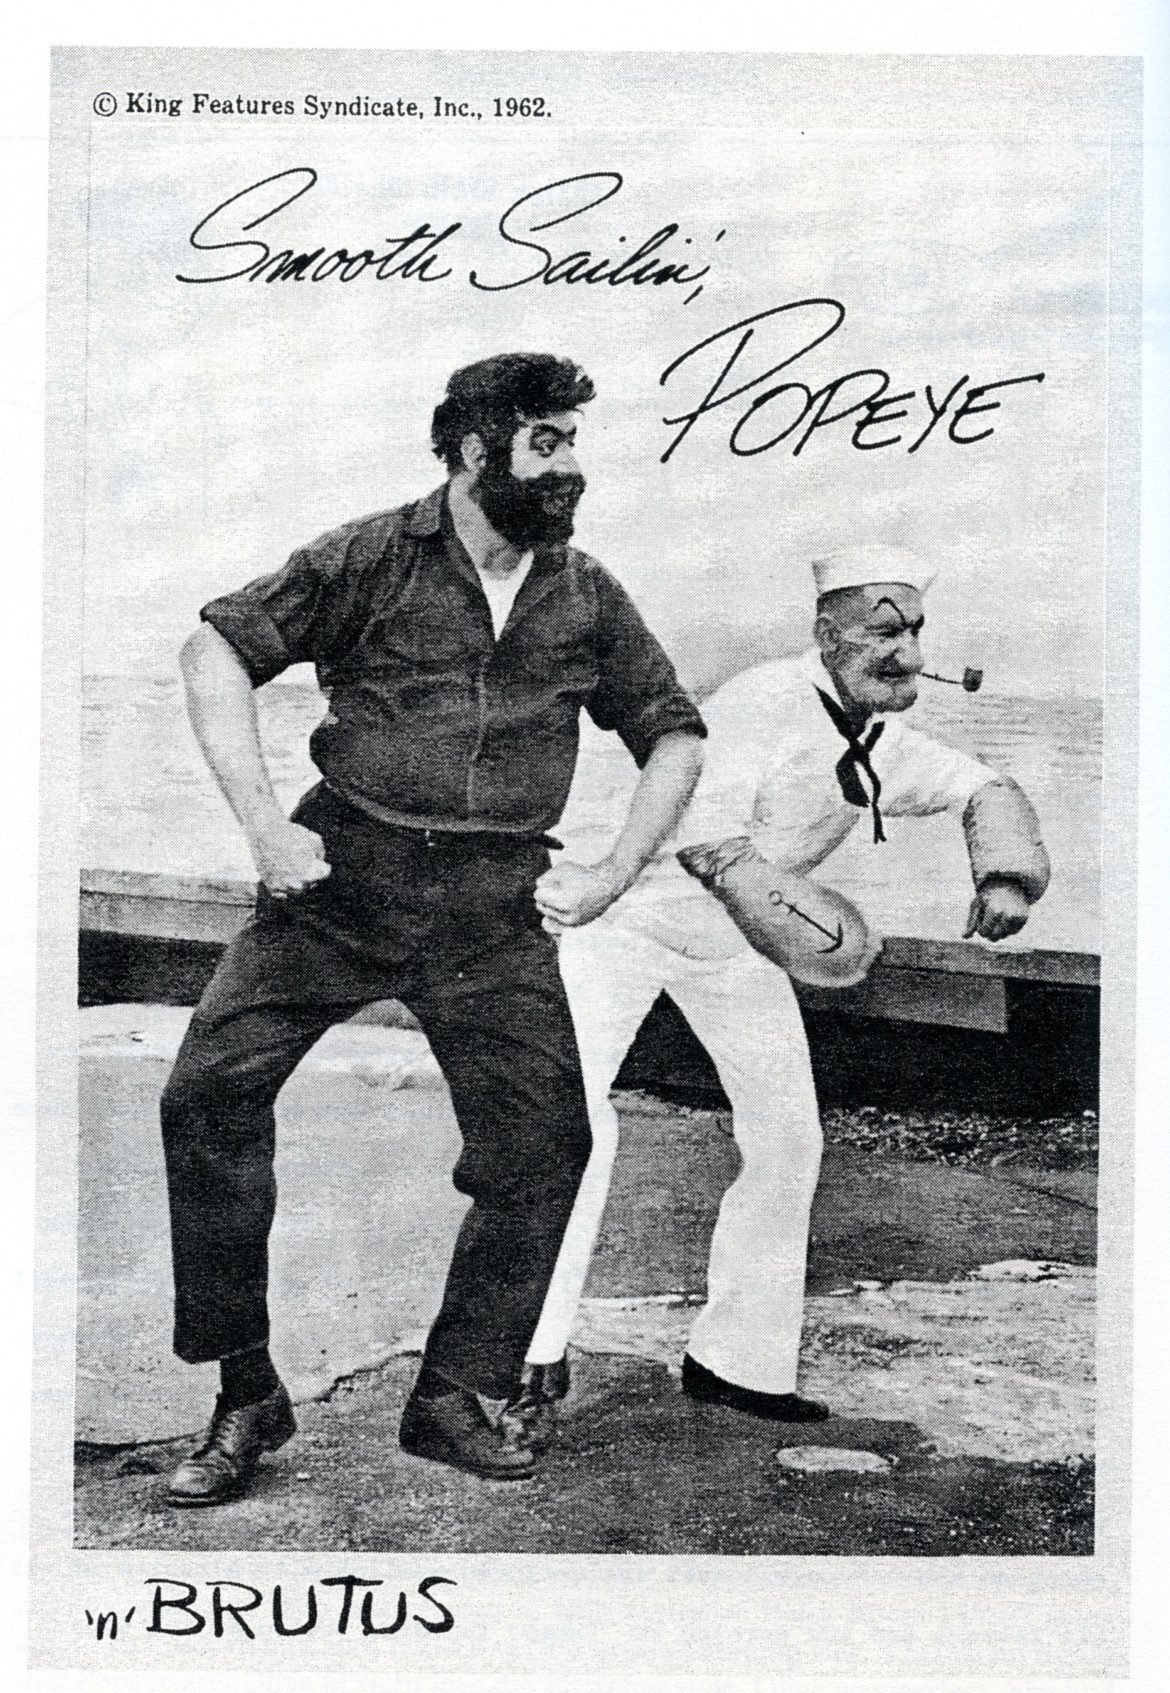 Brett Pearson was Brutus and Herb Messinger portrayed Popeye for the sailor's physical fitness campaign.